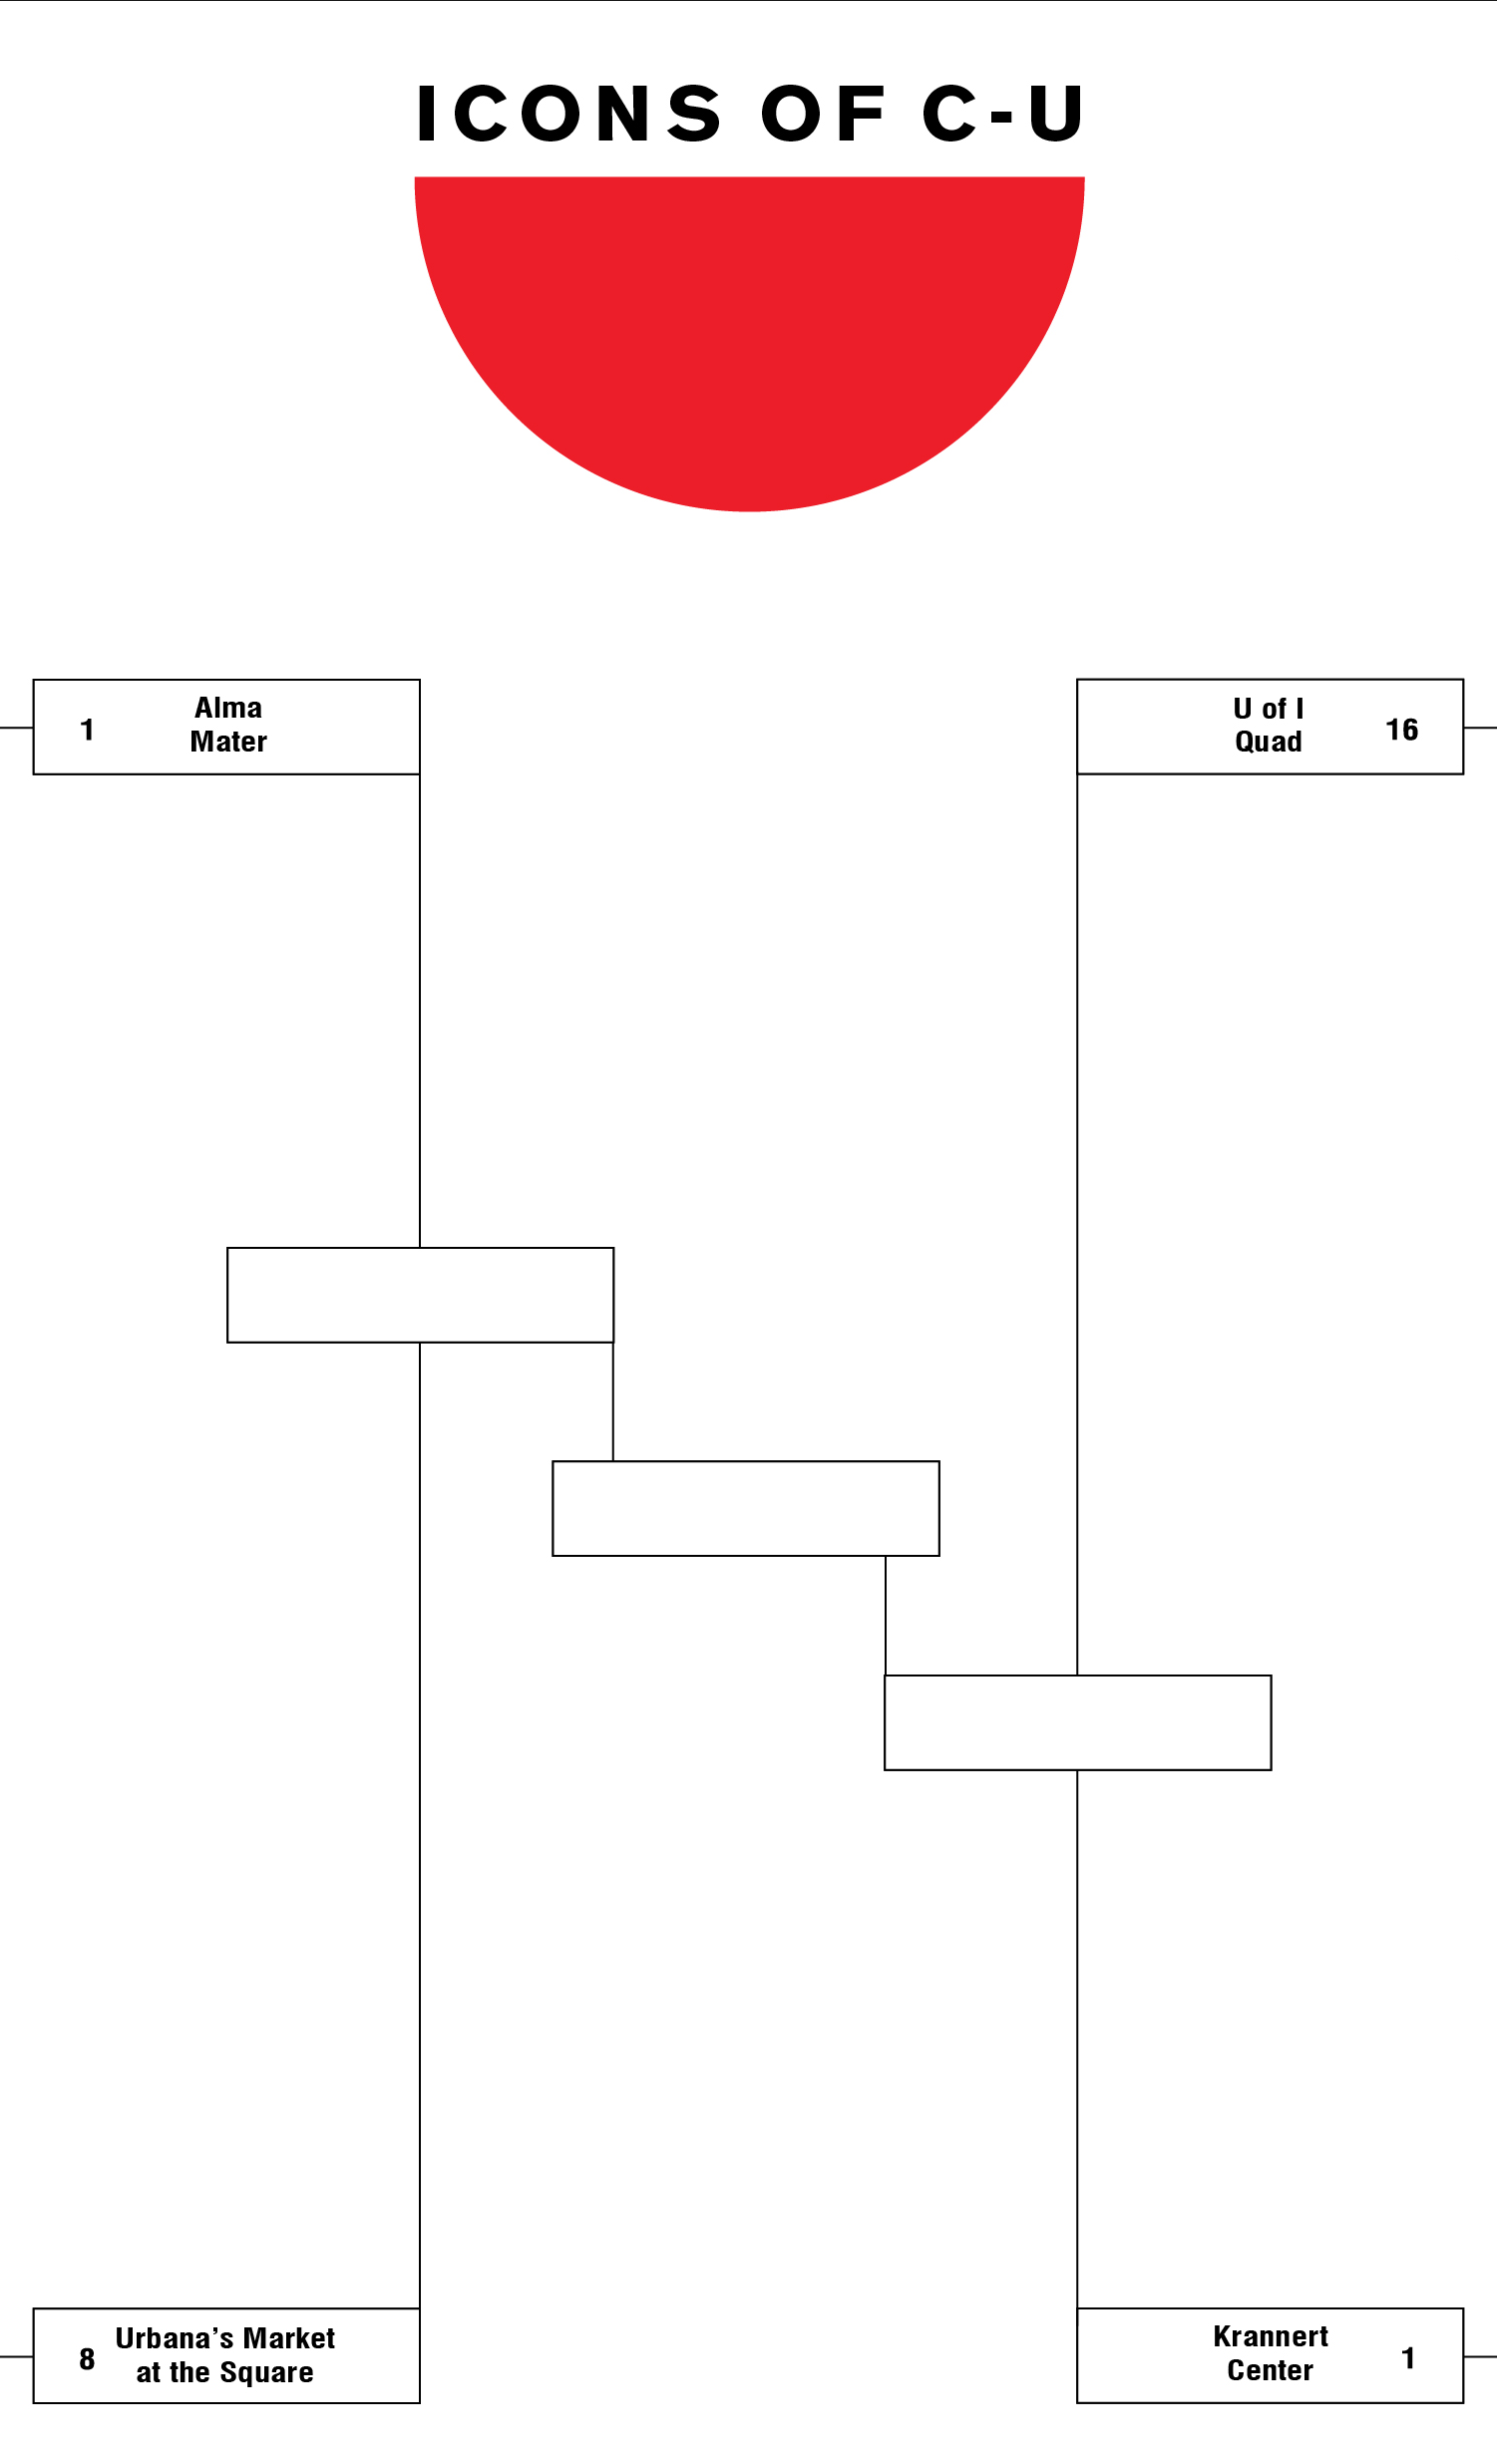 IMAGE: One 4 team NCAA style region bracket, white background with black lines and black text for names and seeds.